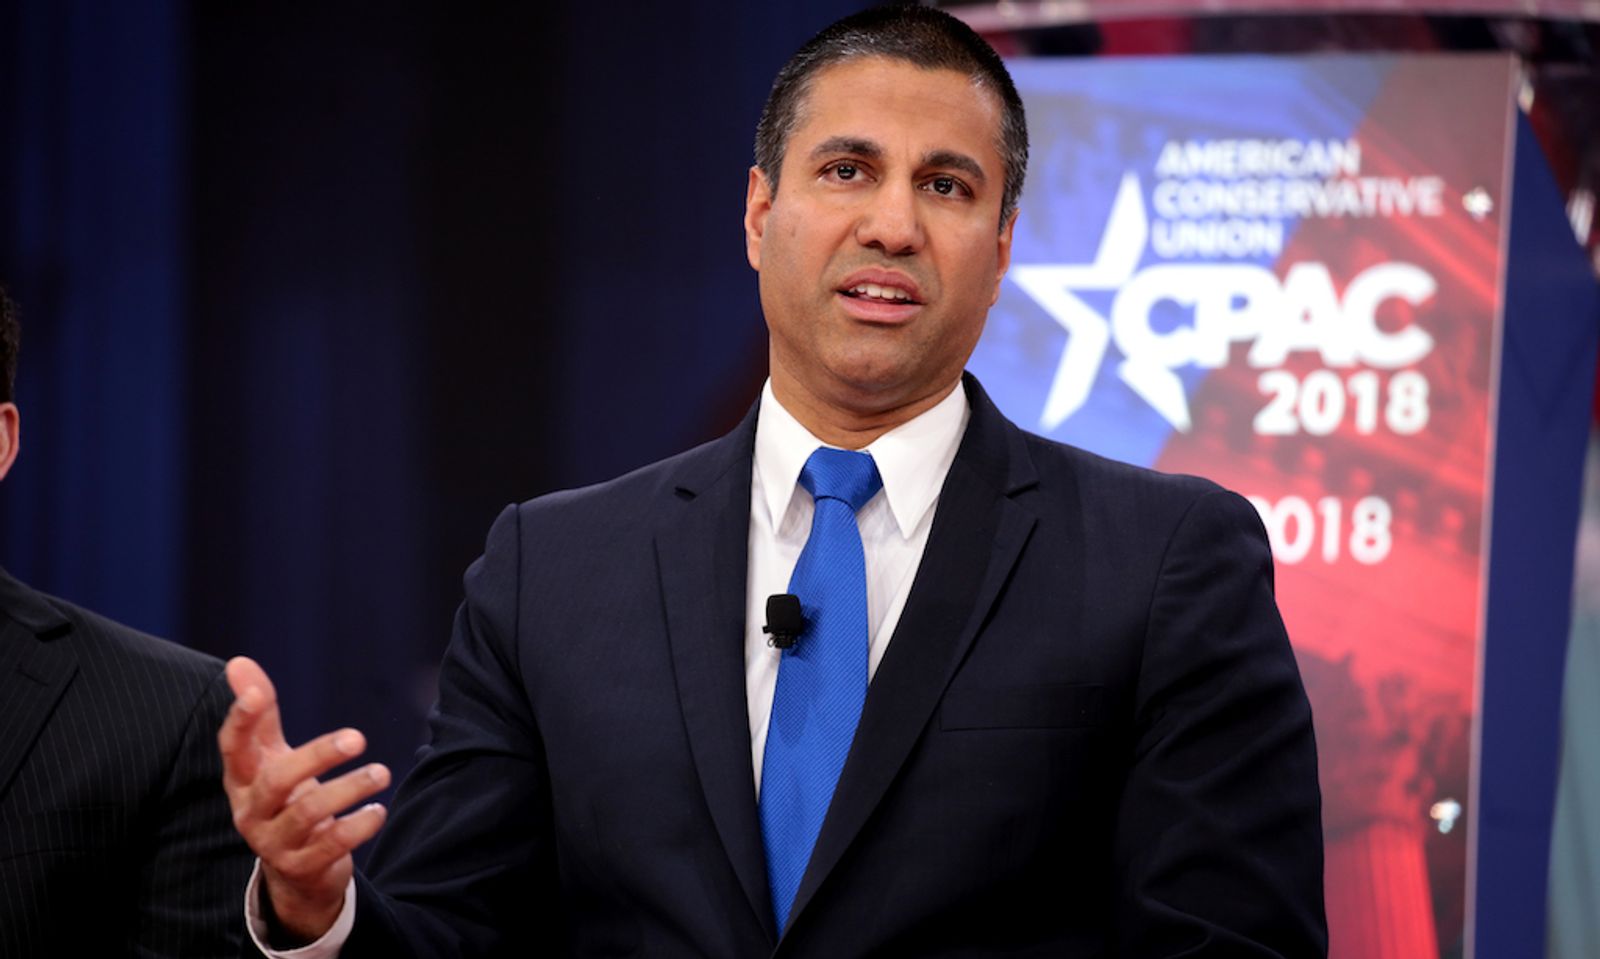 Net Neutrality: FCC Chair Ajit Pai Made Up Cyber-Attack Story